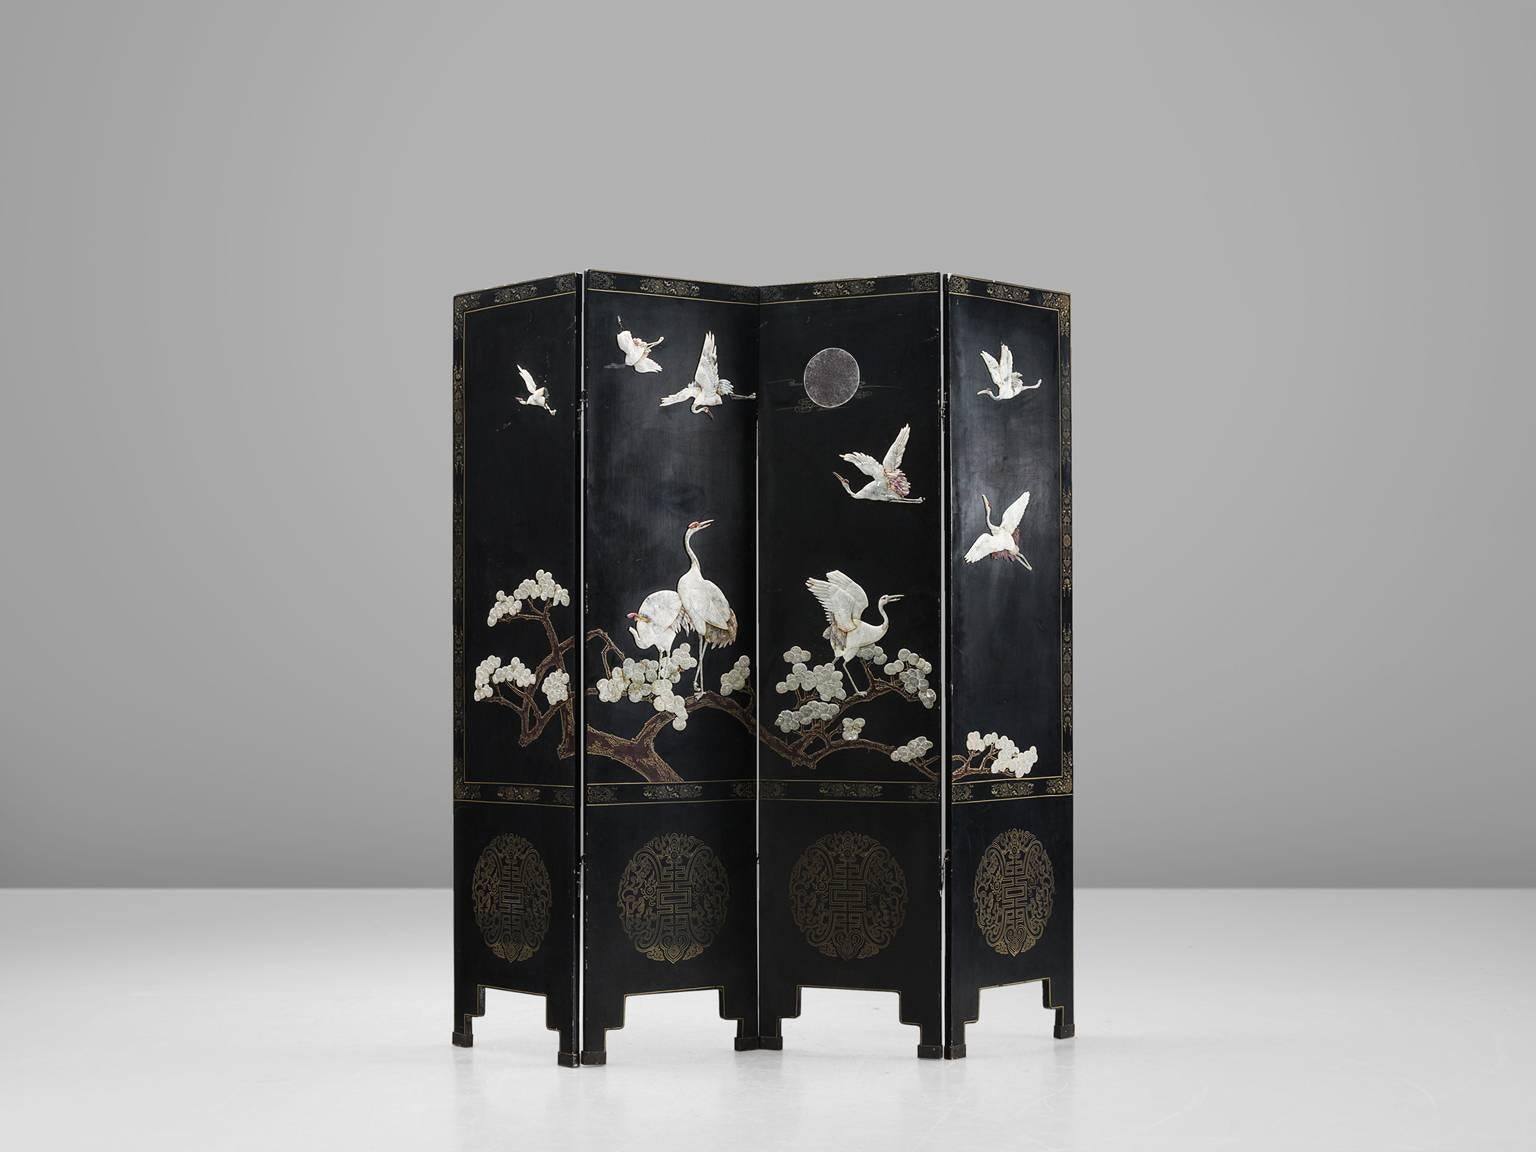 Room divider, with Japanese nature depiction, Europe, 1960s.

This splendid screen features a Stark black base with white and golden figures. The iconic cranes and Japanese cherry blossom are featured along side a moon. The screen has four folding